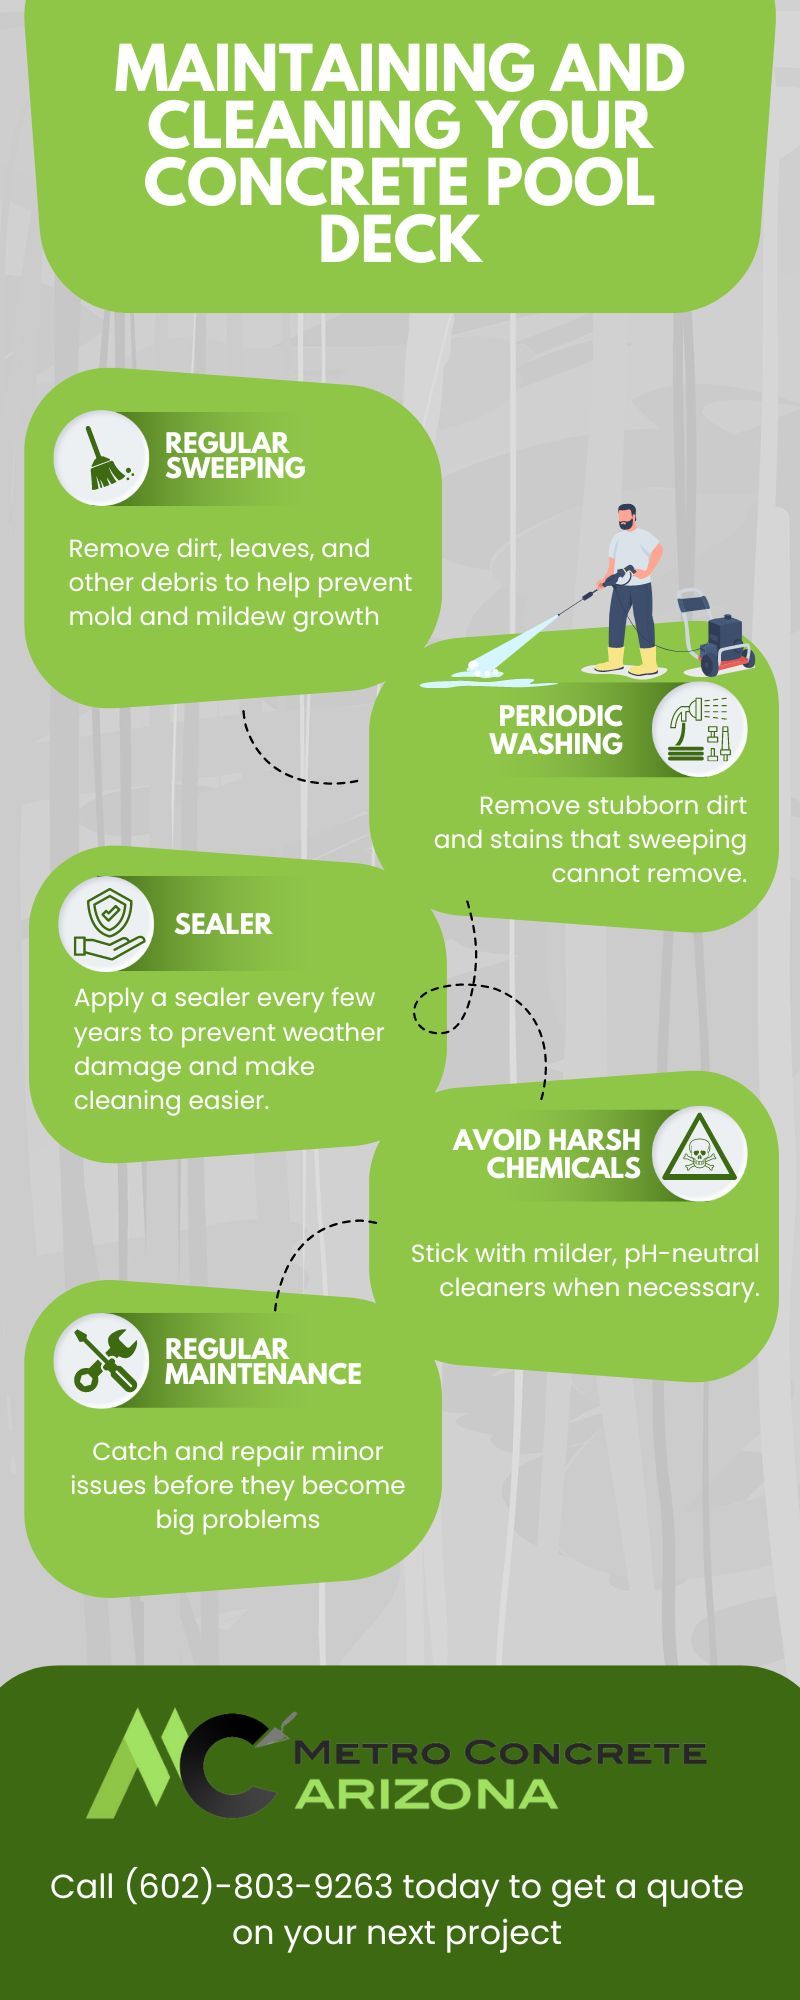 Infographic about cleaning and maintaining your concrete pool deck